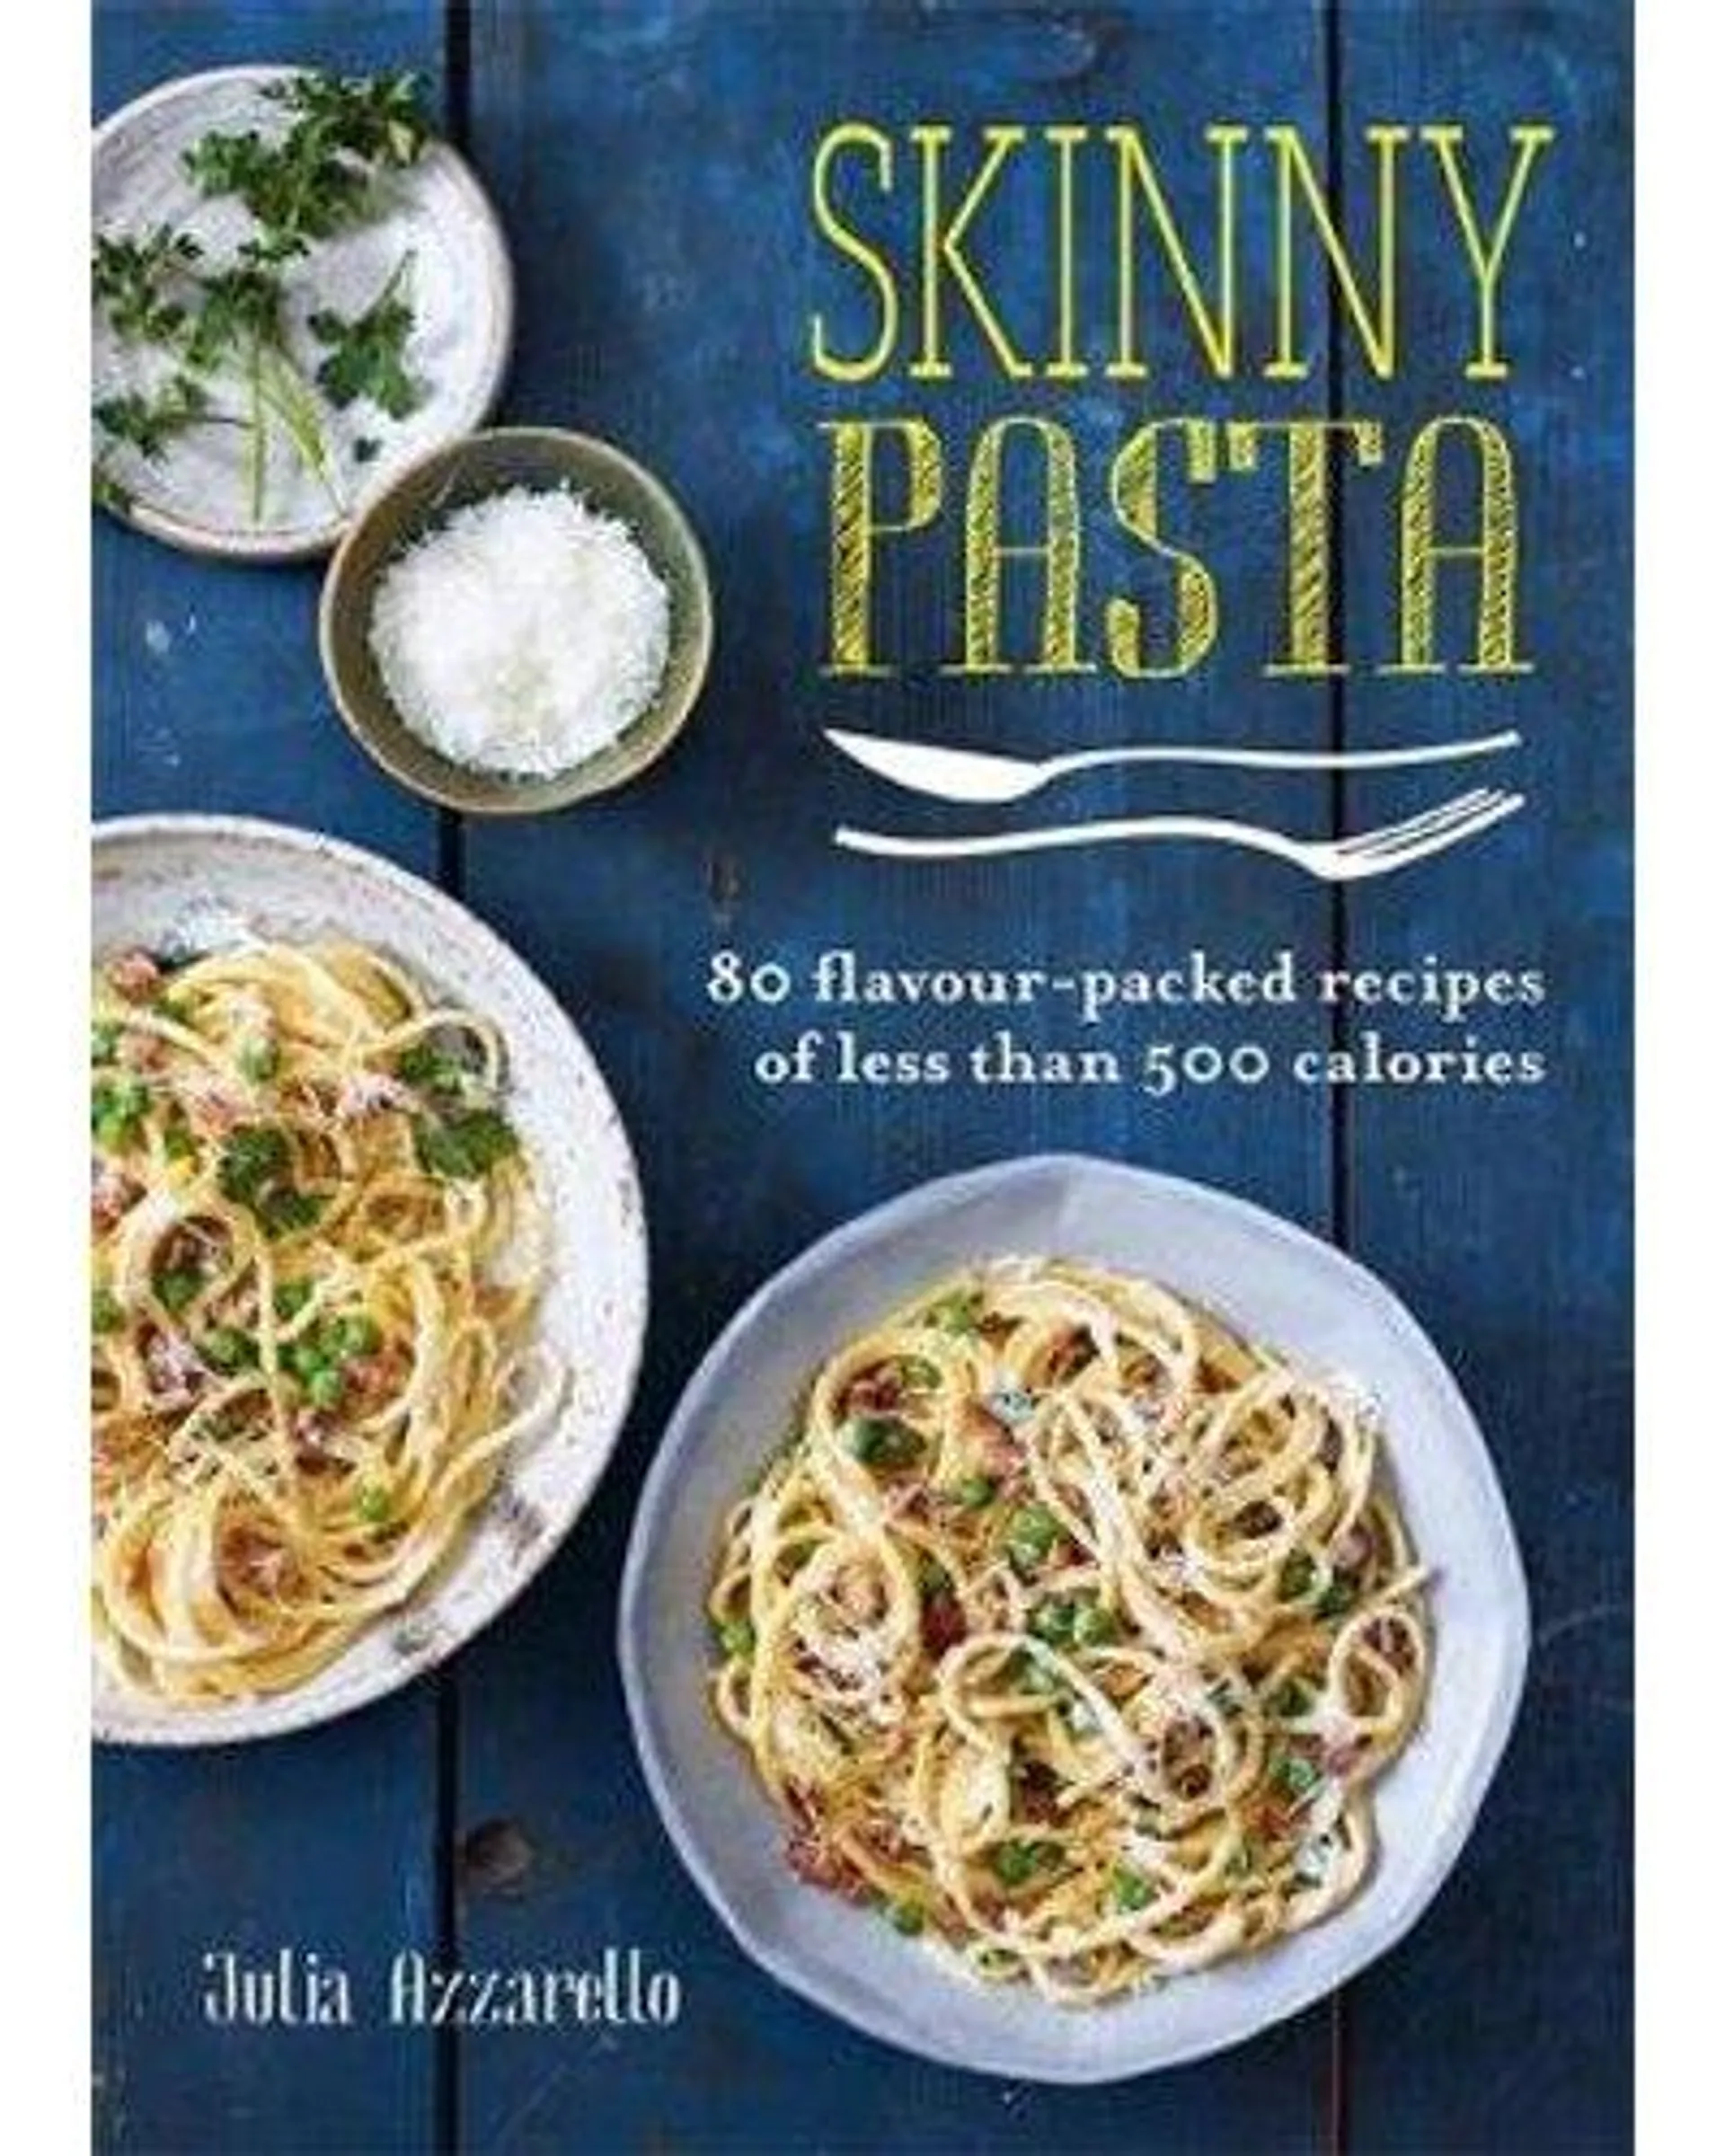 Skinny Pasta - 80 Flavour-Packed Recipes Of Less Than 500 Calories (Paperback)